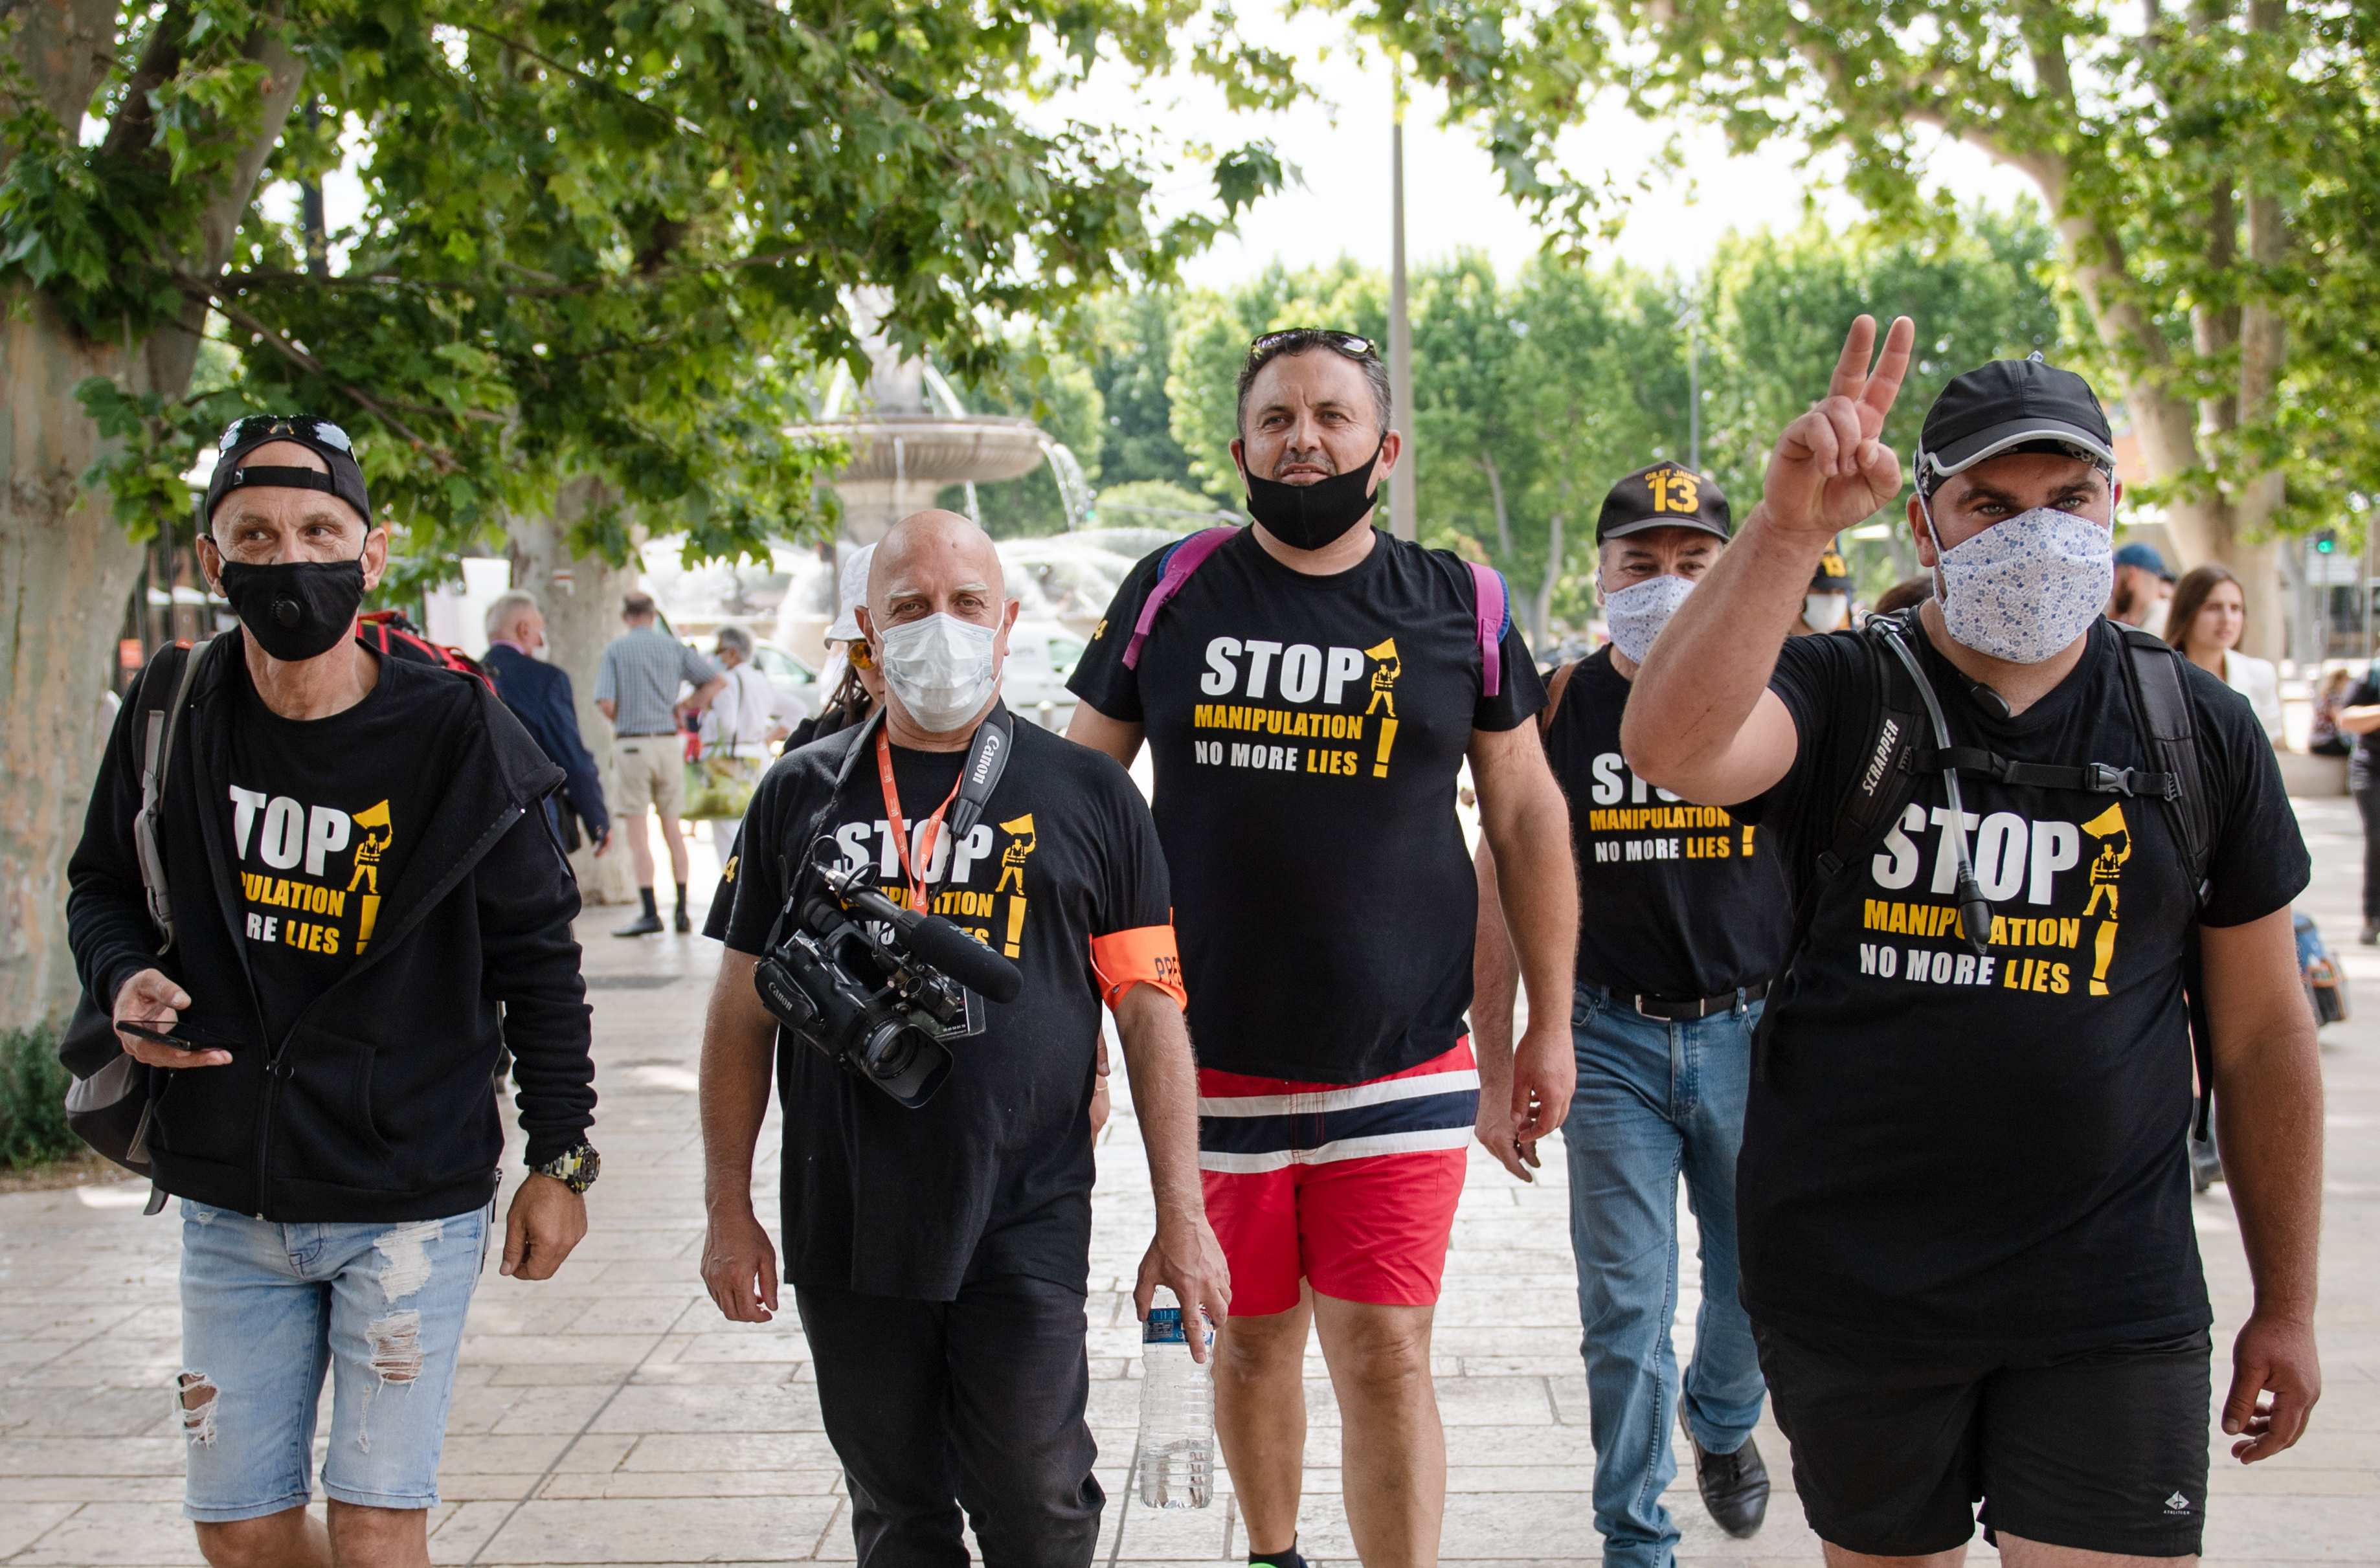 Yellow vests demonstrators wearing t-shirts reading "Stop Manipulation, no more lies" walks as they take part in the "Marseille to Paris " march from Aix-en-Provence to Paris, on June 2, 2020. (Photo by CLEMENT MAHOUDEAU/AFP via Getty Images)